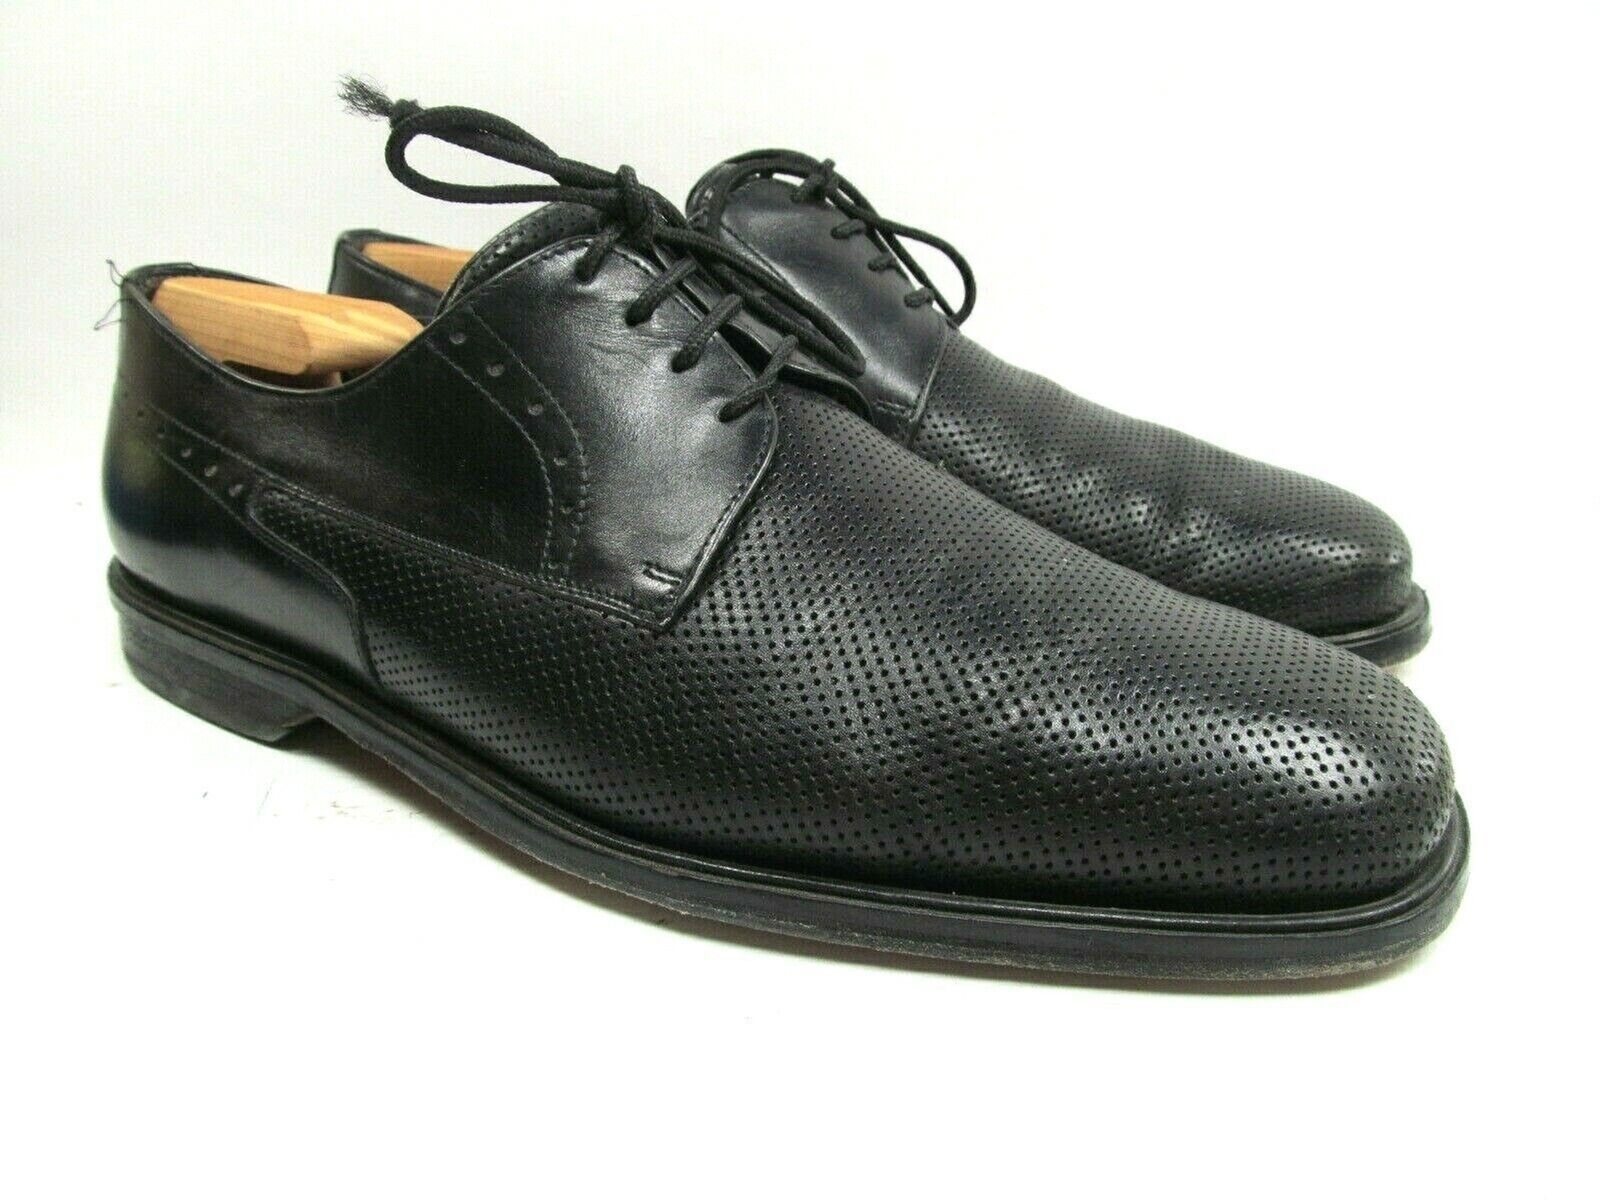 Primary image for Paolo De Marco Leather Derbys Size US 10  Lace Up  Made In Spain